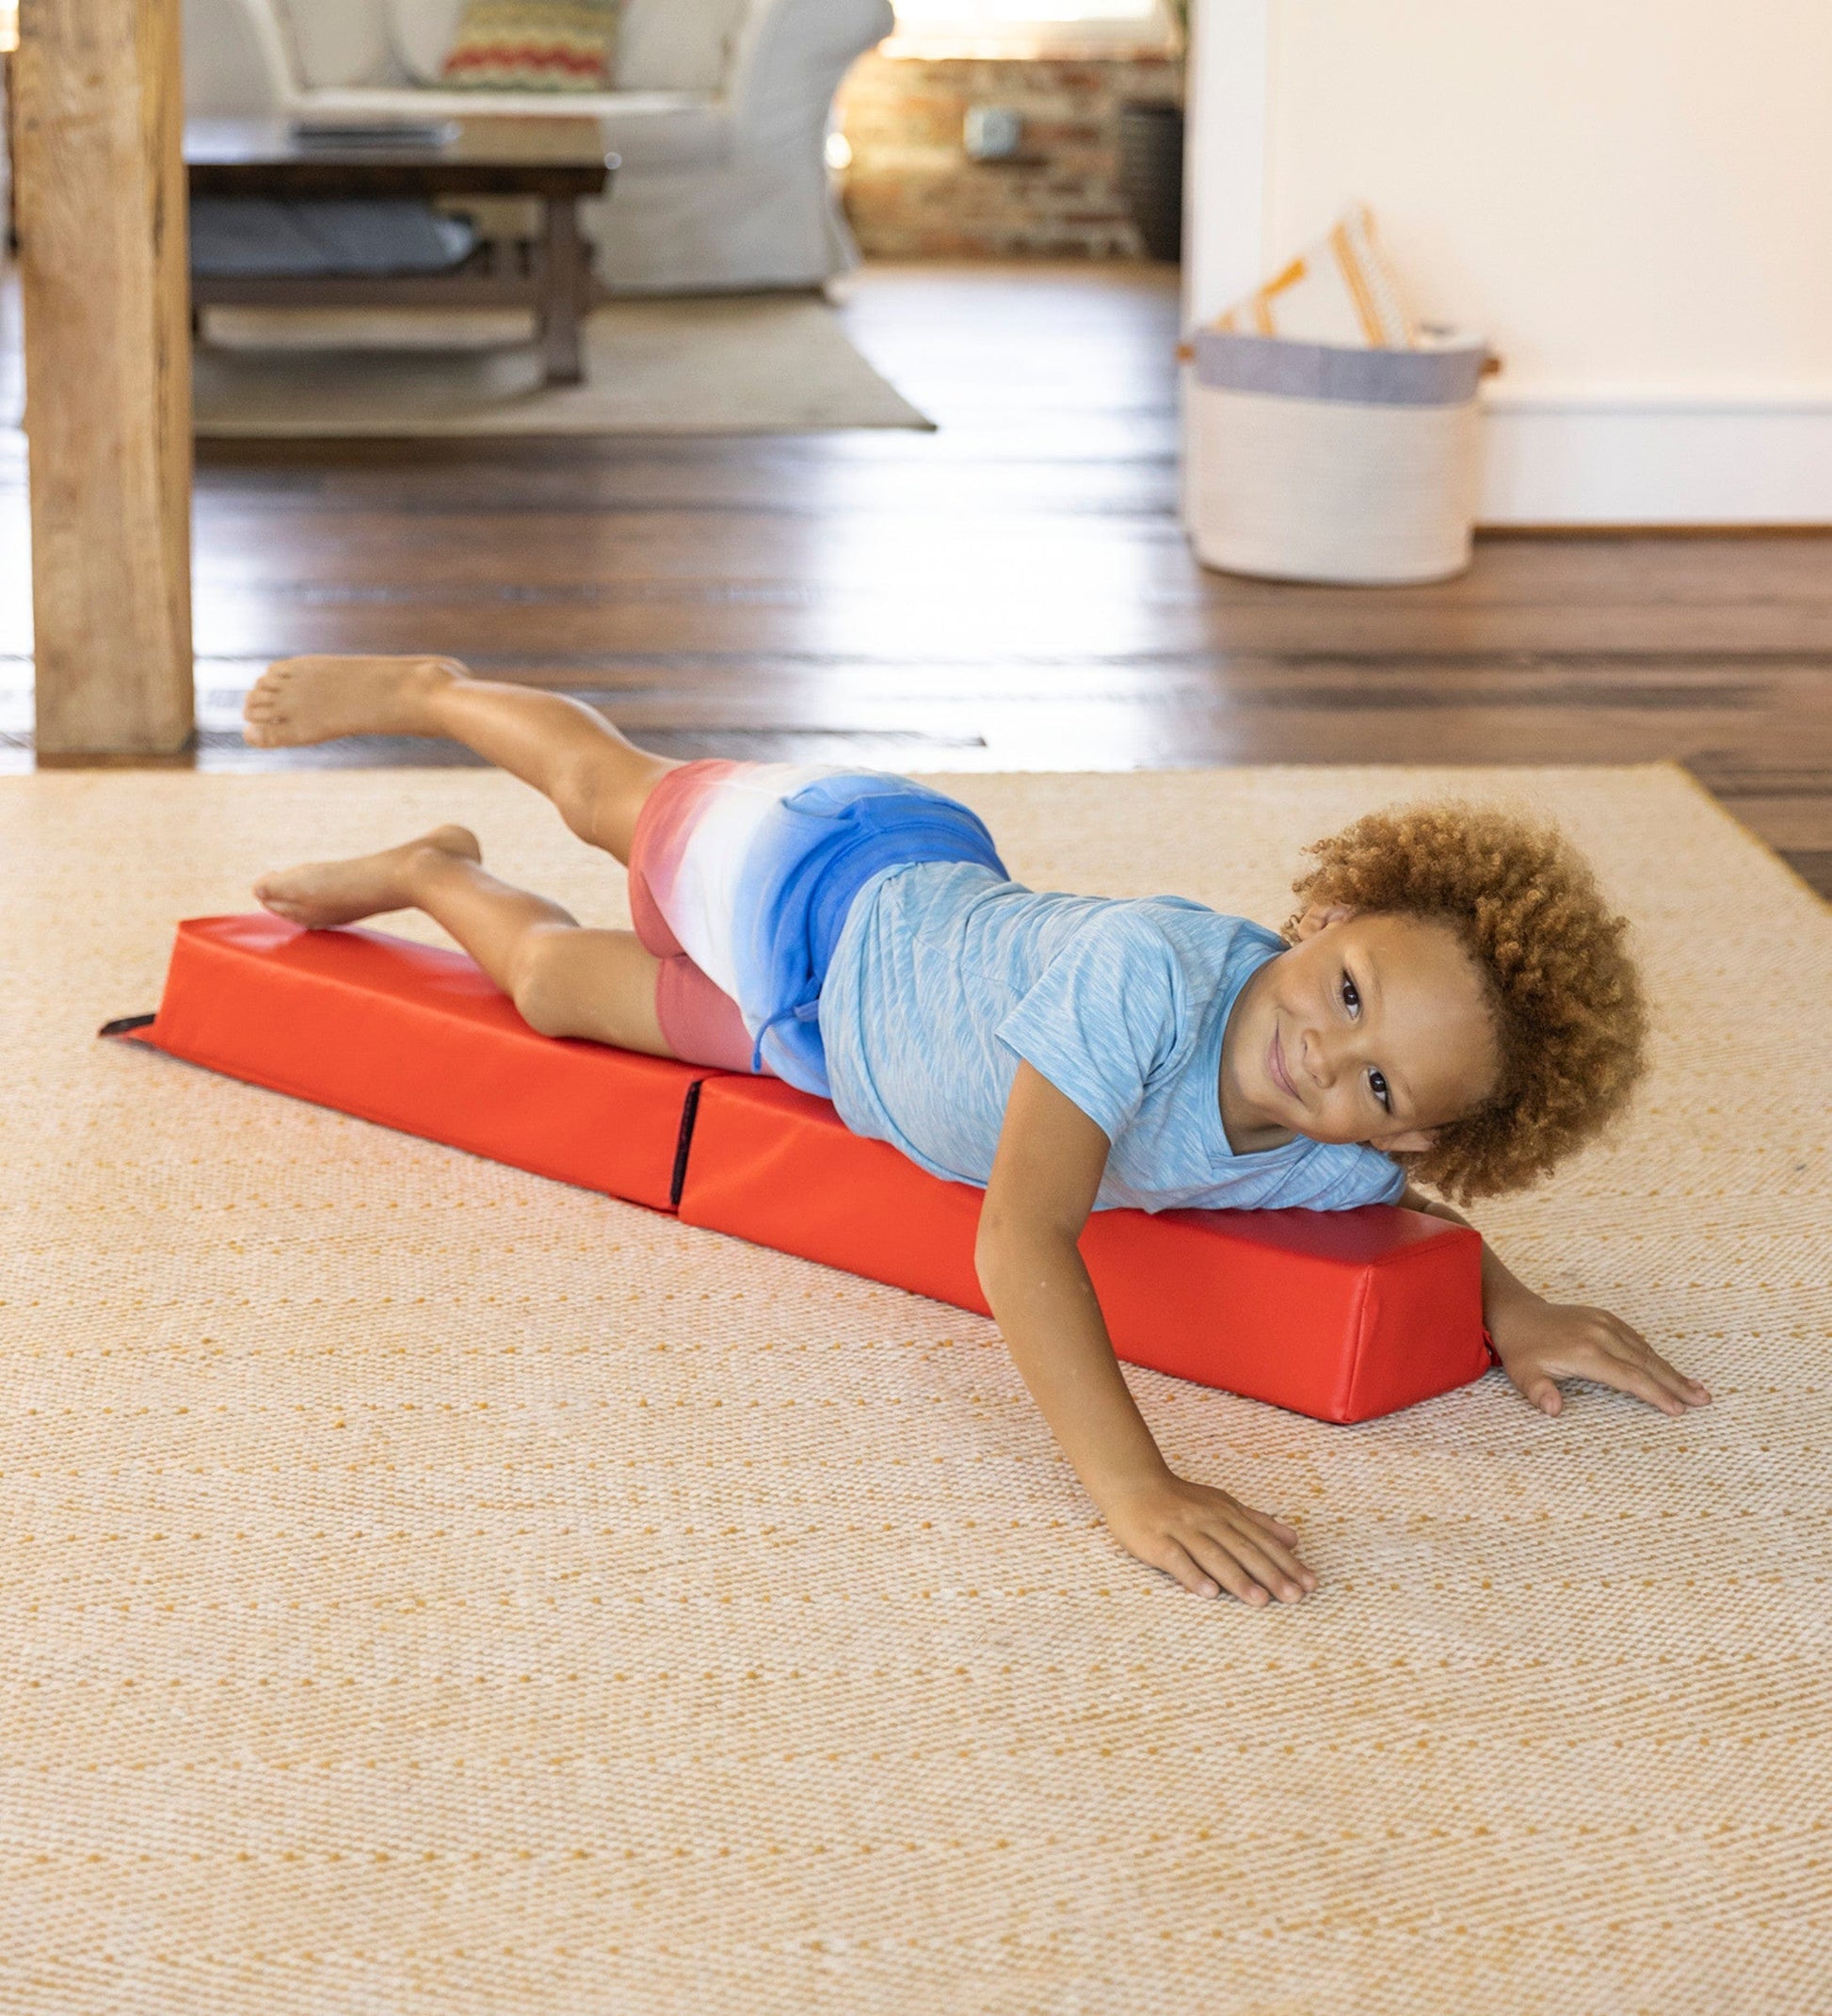 A child with medium skin tone and short brown hair is lying on the 4' Gymnastics Balance Beam, favoring their left side.